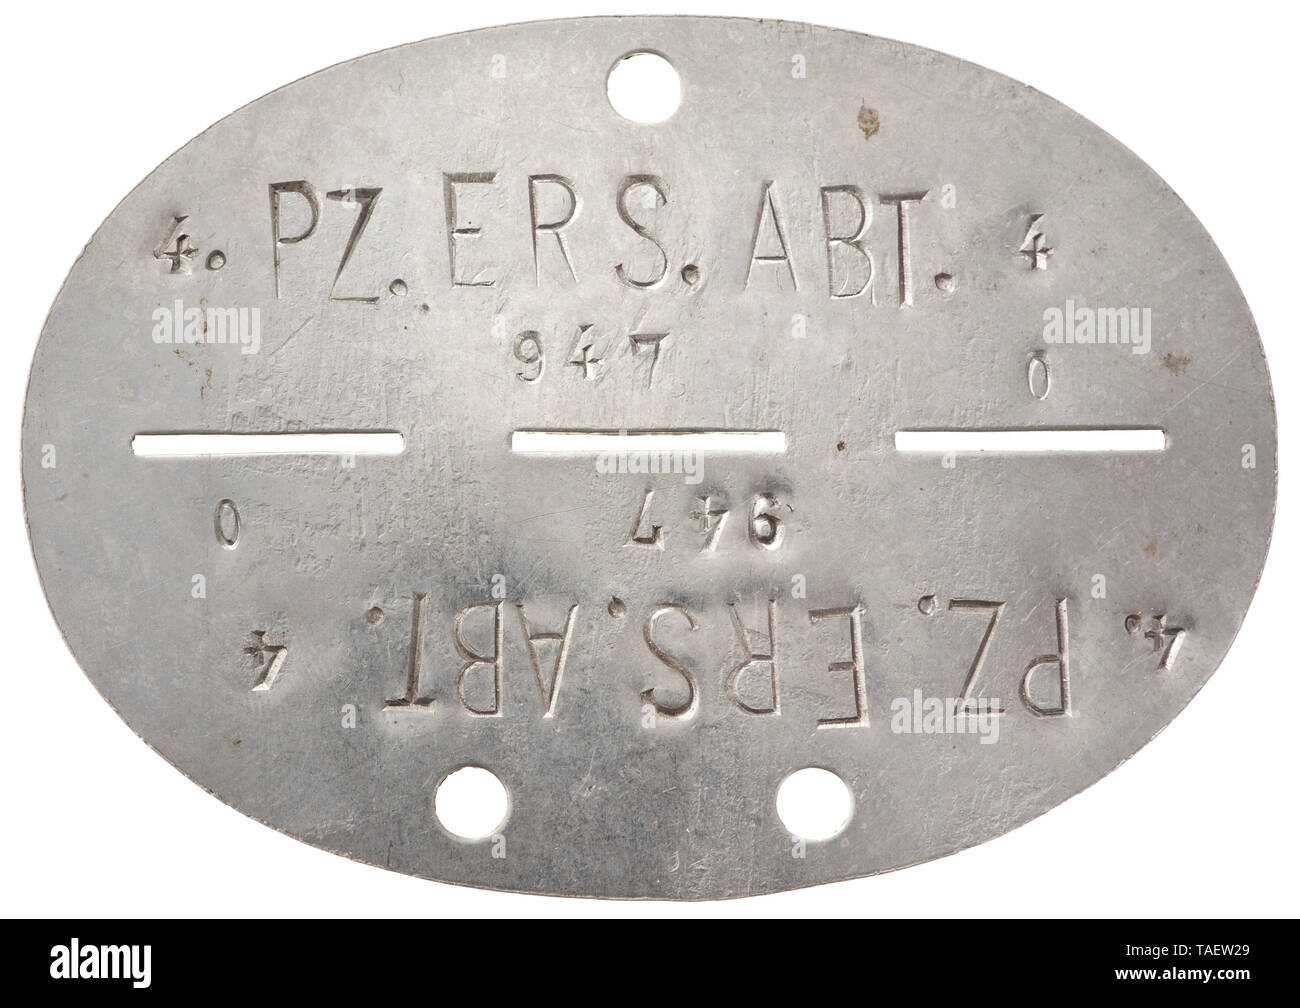 An identification tag of Panzer Replacement Battalion 4 Eisenblech mit vs. Bezeichnung '4. Pz. Ers. Abt. 4 - 947 0', rs. ohne Markung. historic, historical, 20th century, Editorial-Use-Only Stock Photo